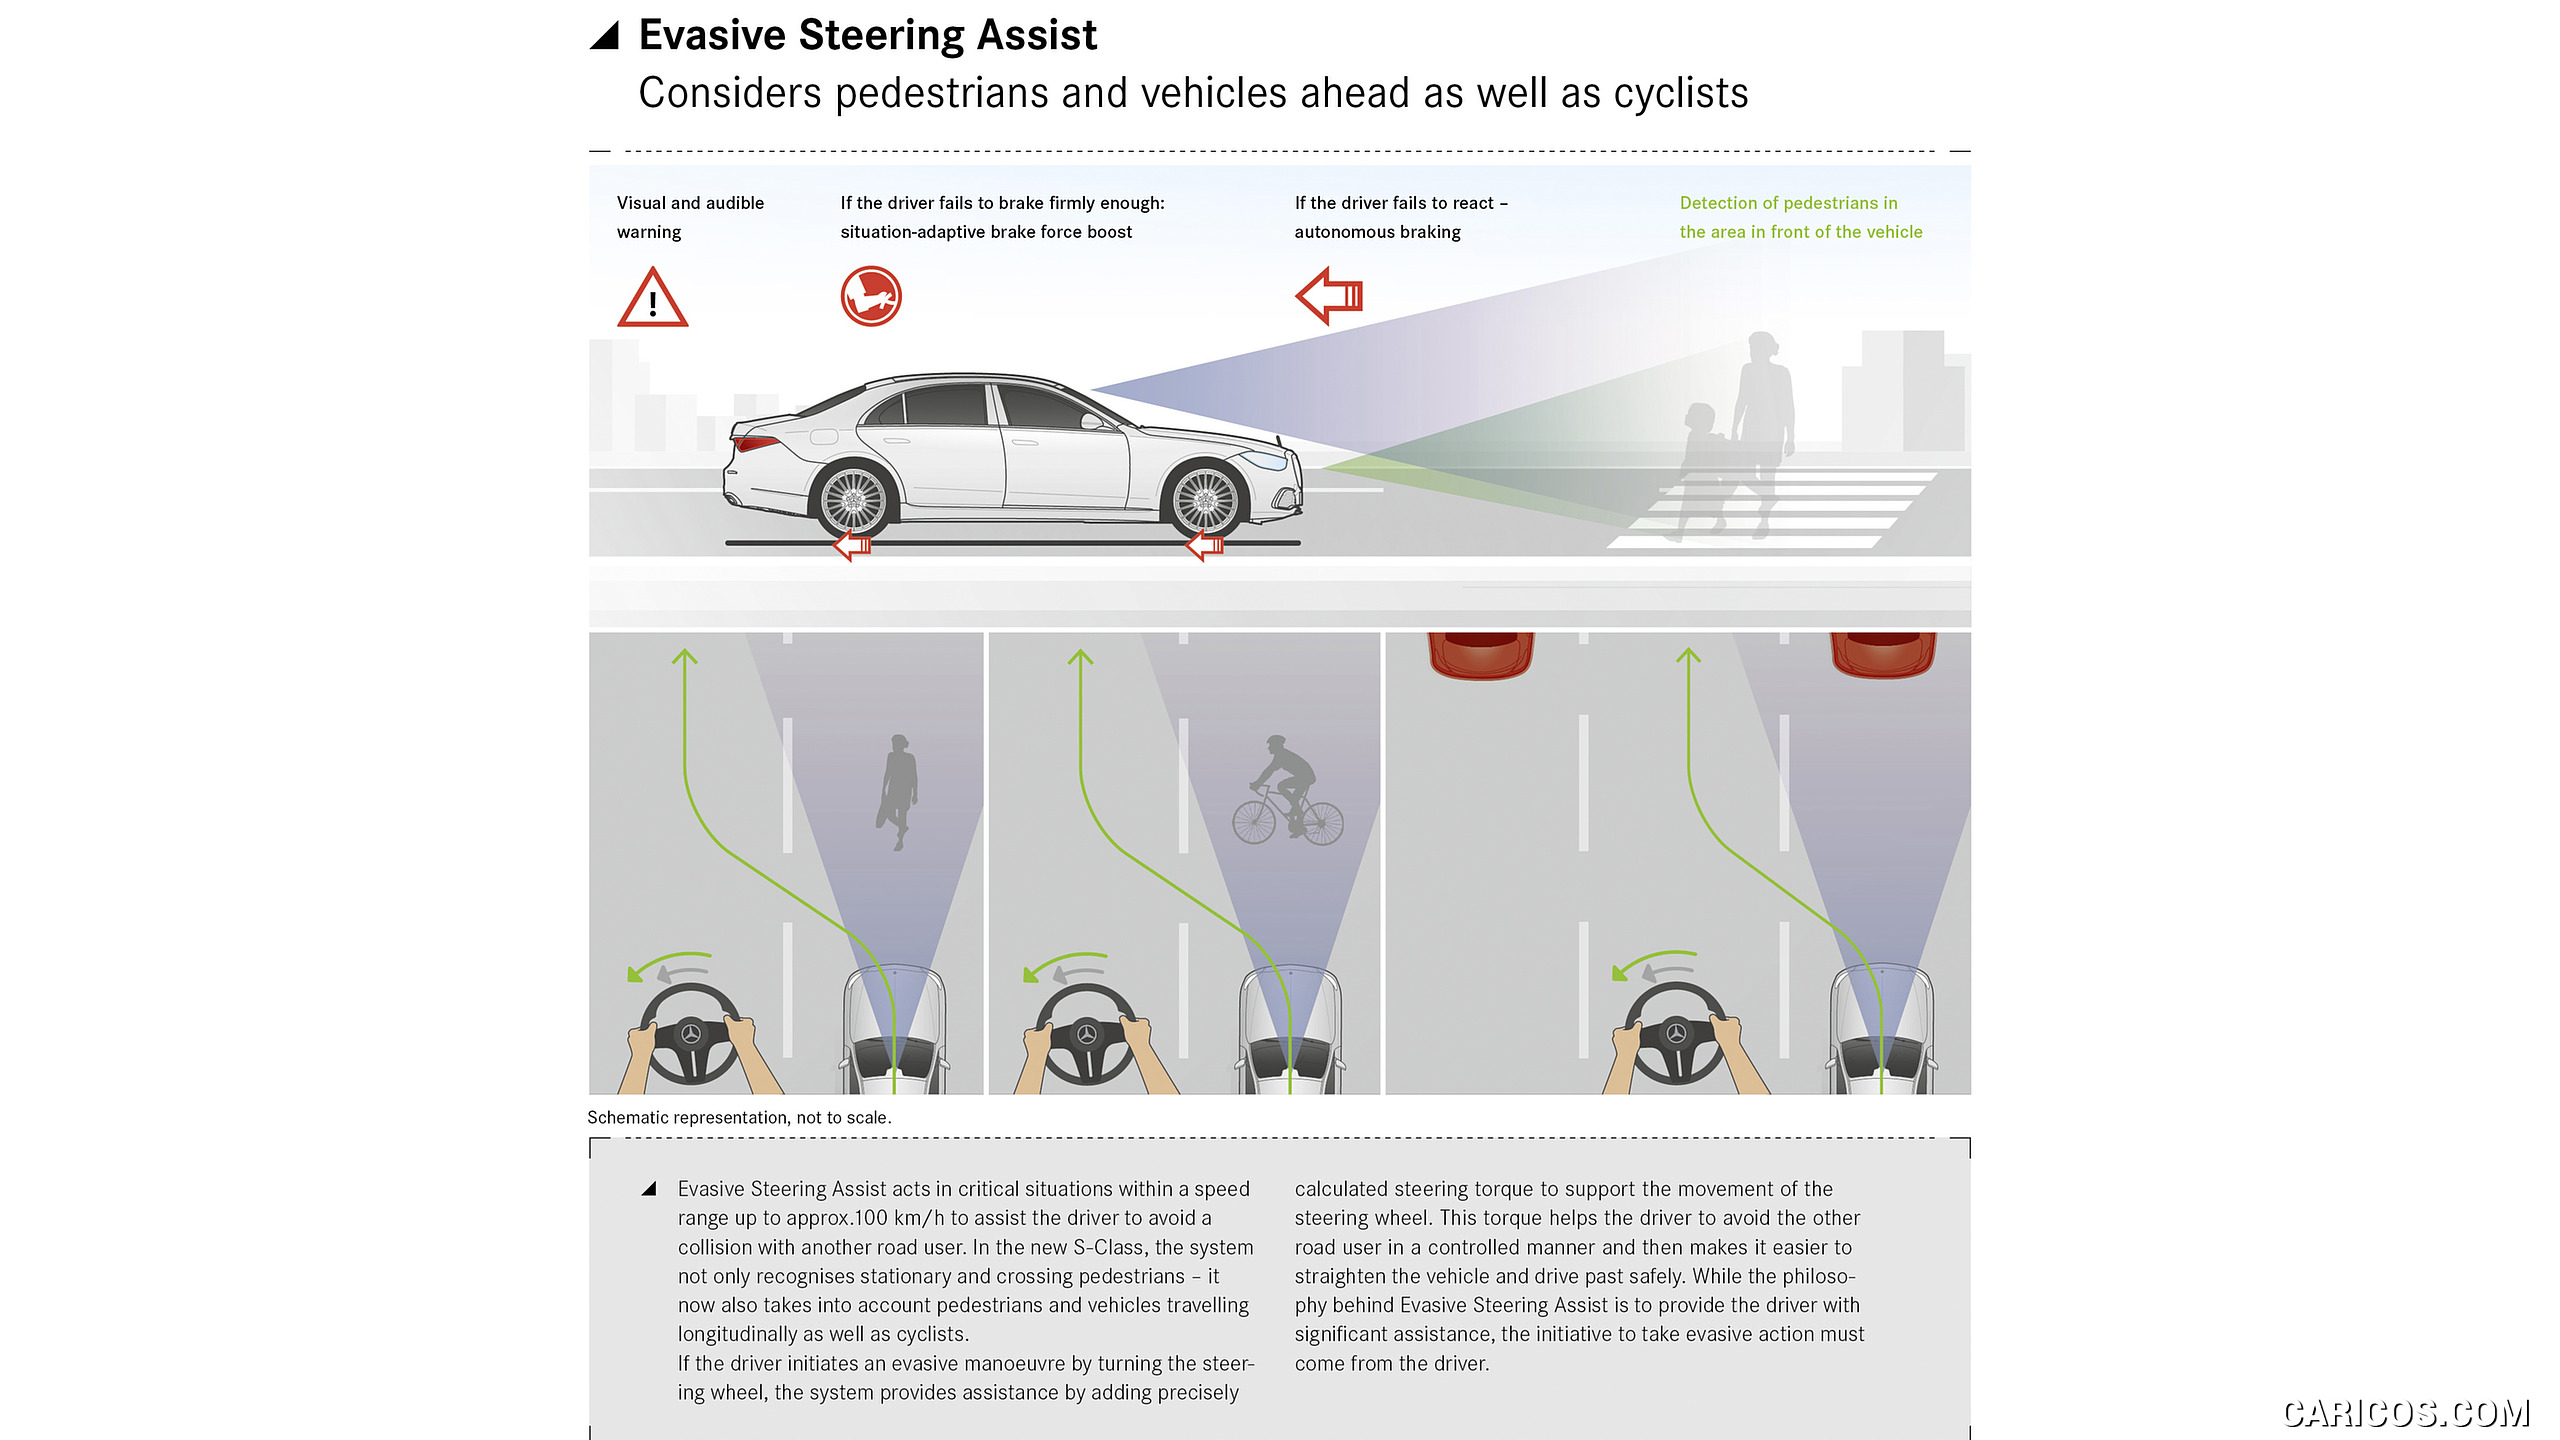 2021 Mercedes-Benz S-Class - Driving assistance system: Evasive Steering Assist, #203 of 316